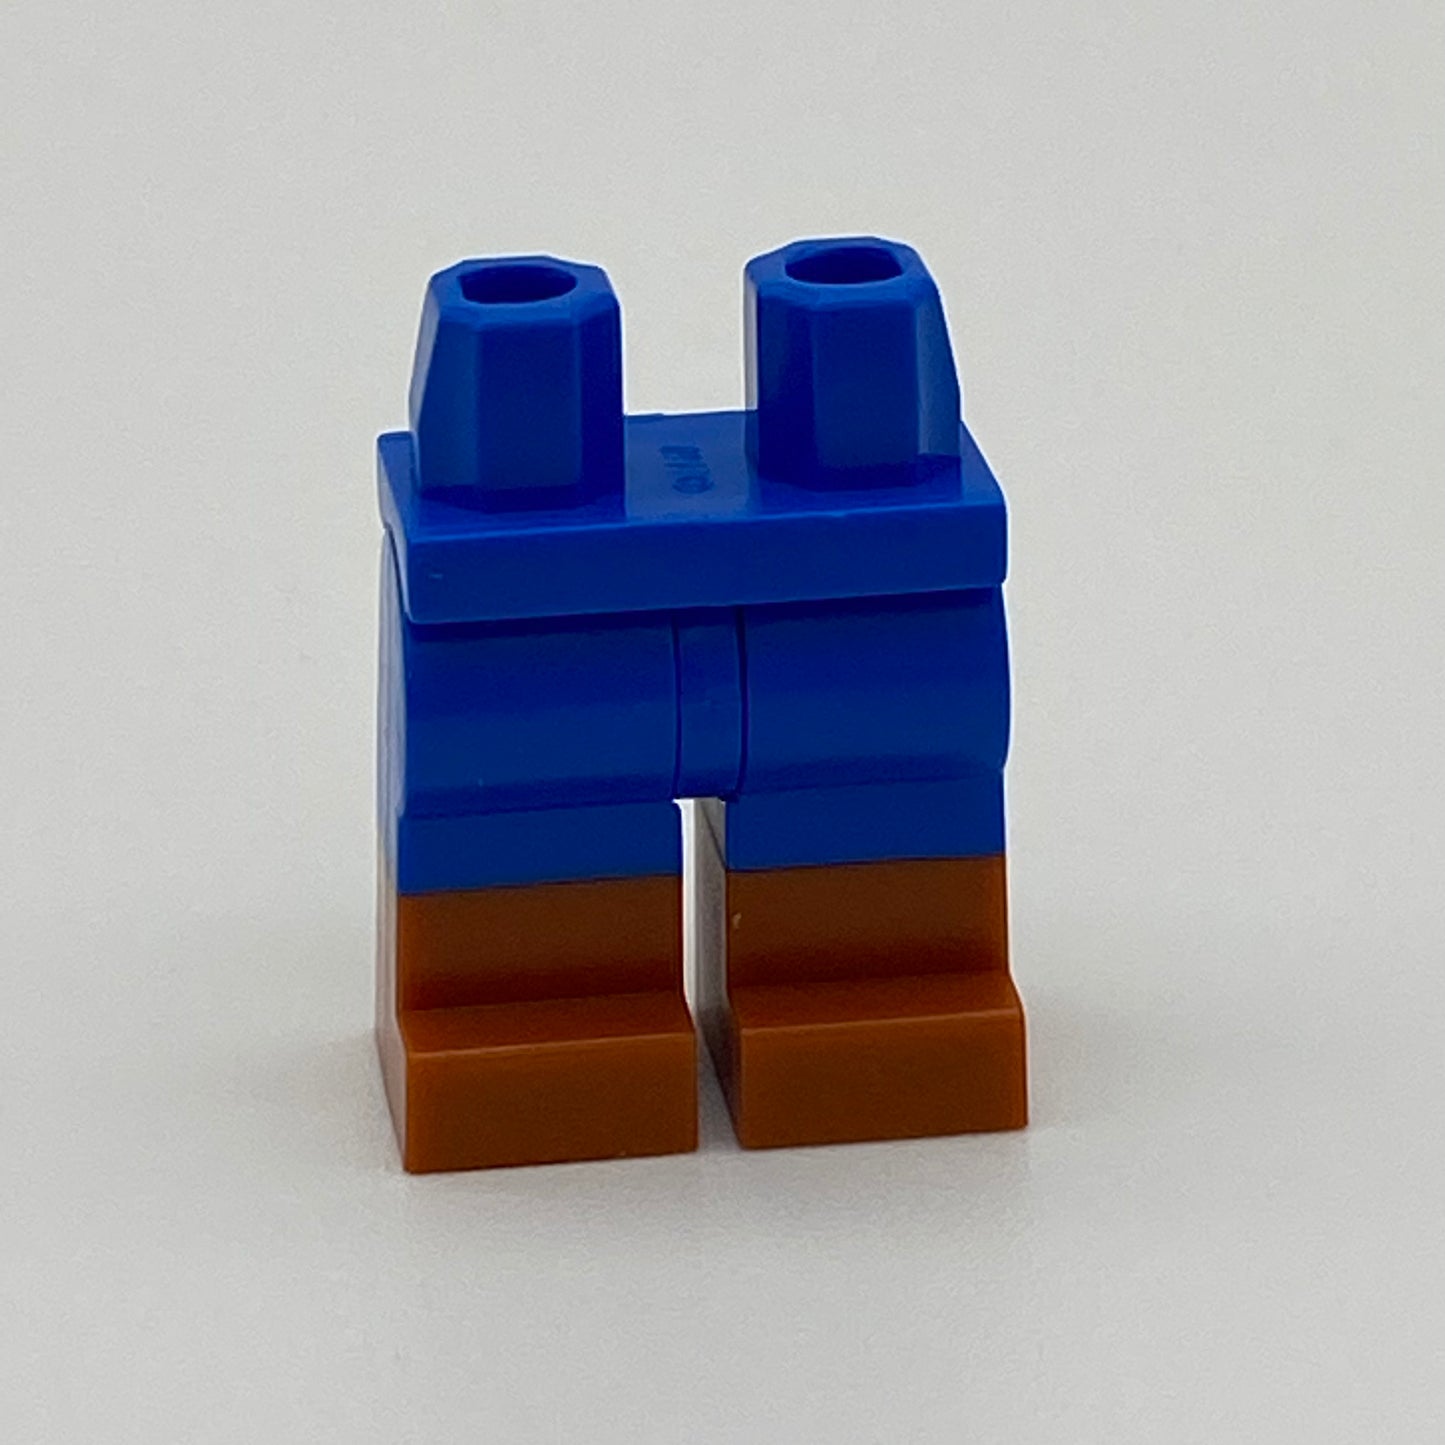 Dual Molded Legs - Blue and Reddish Brown